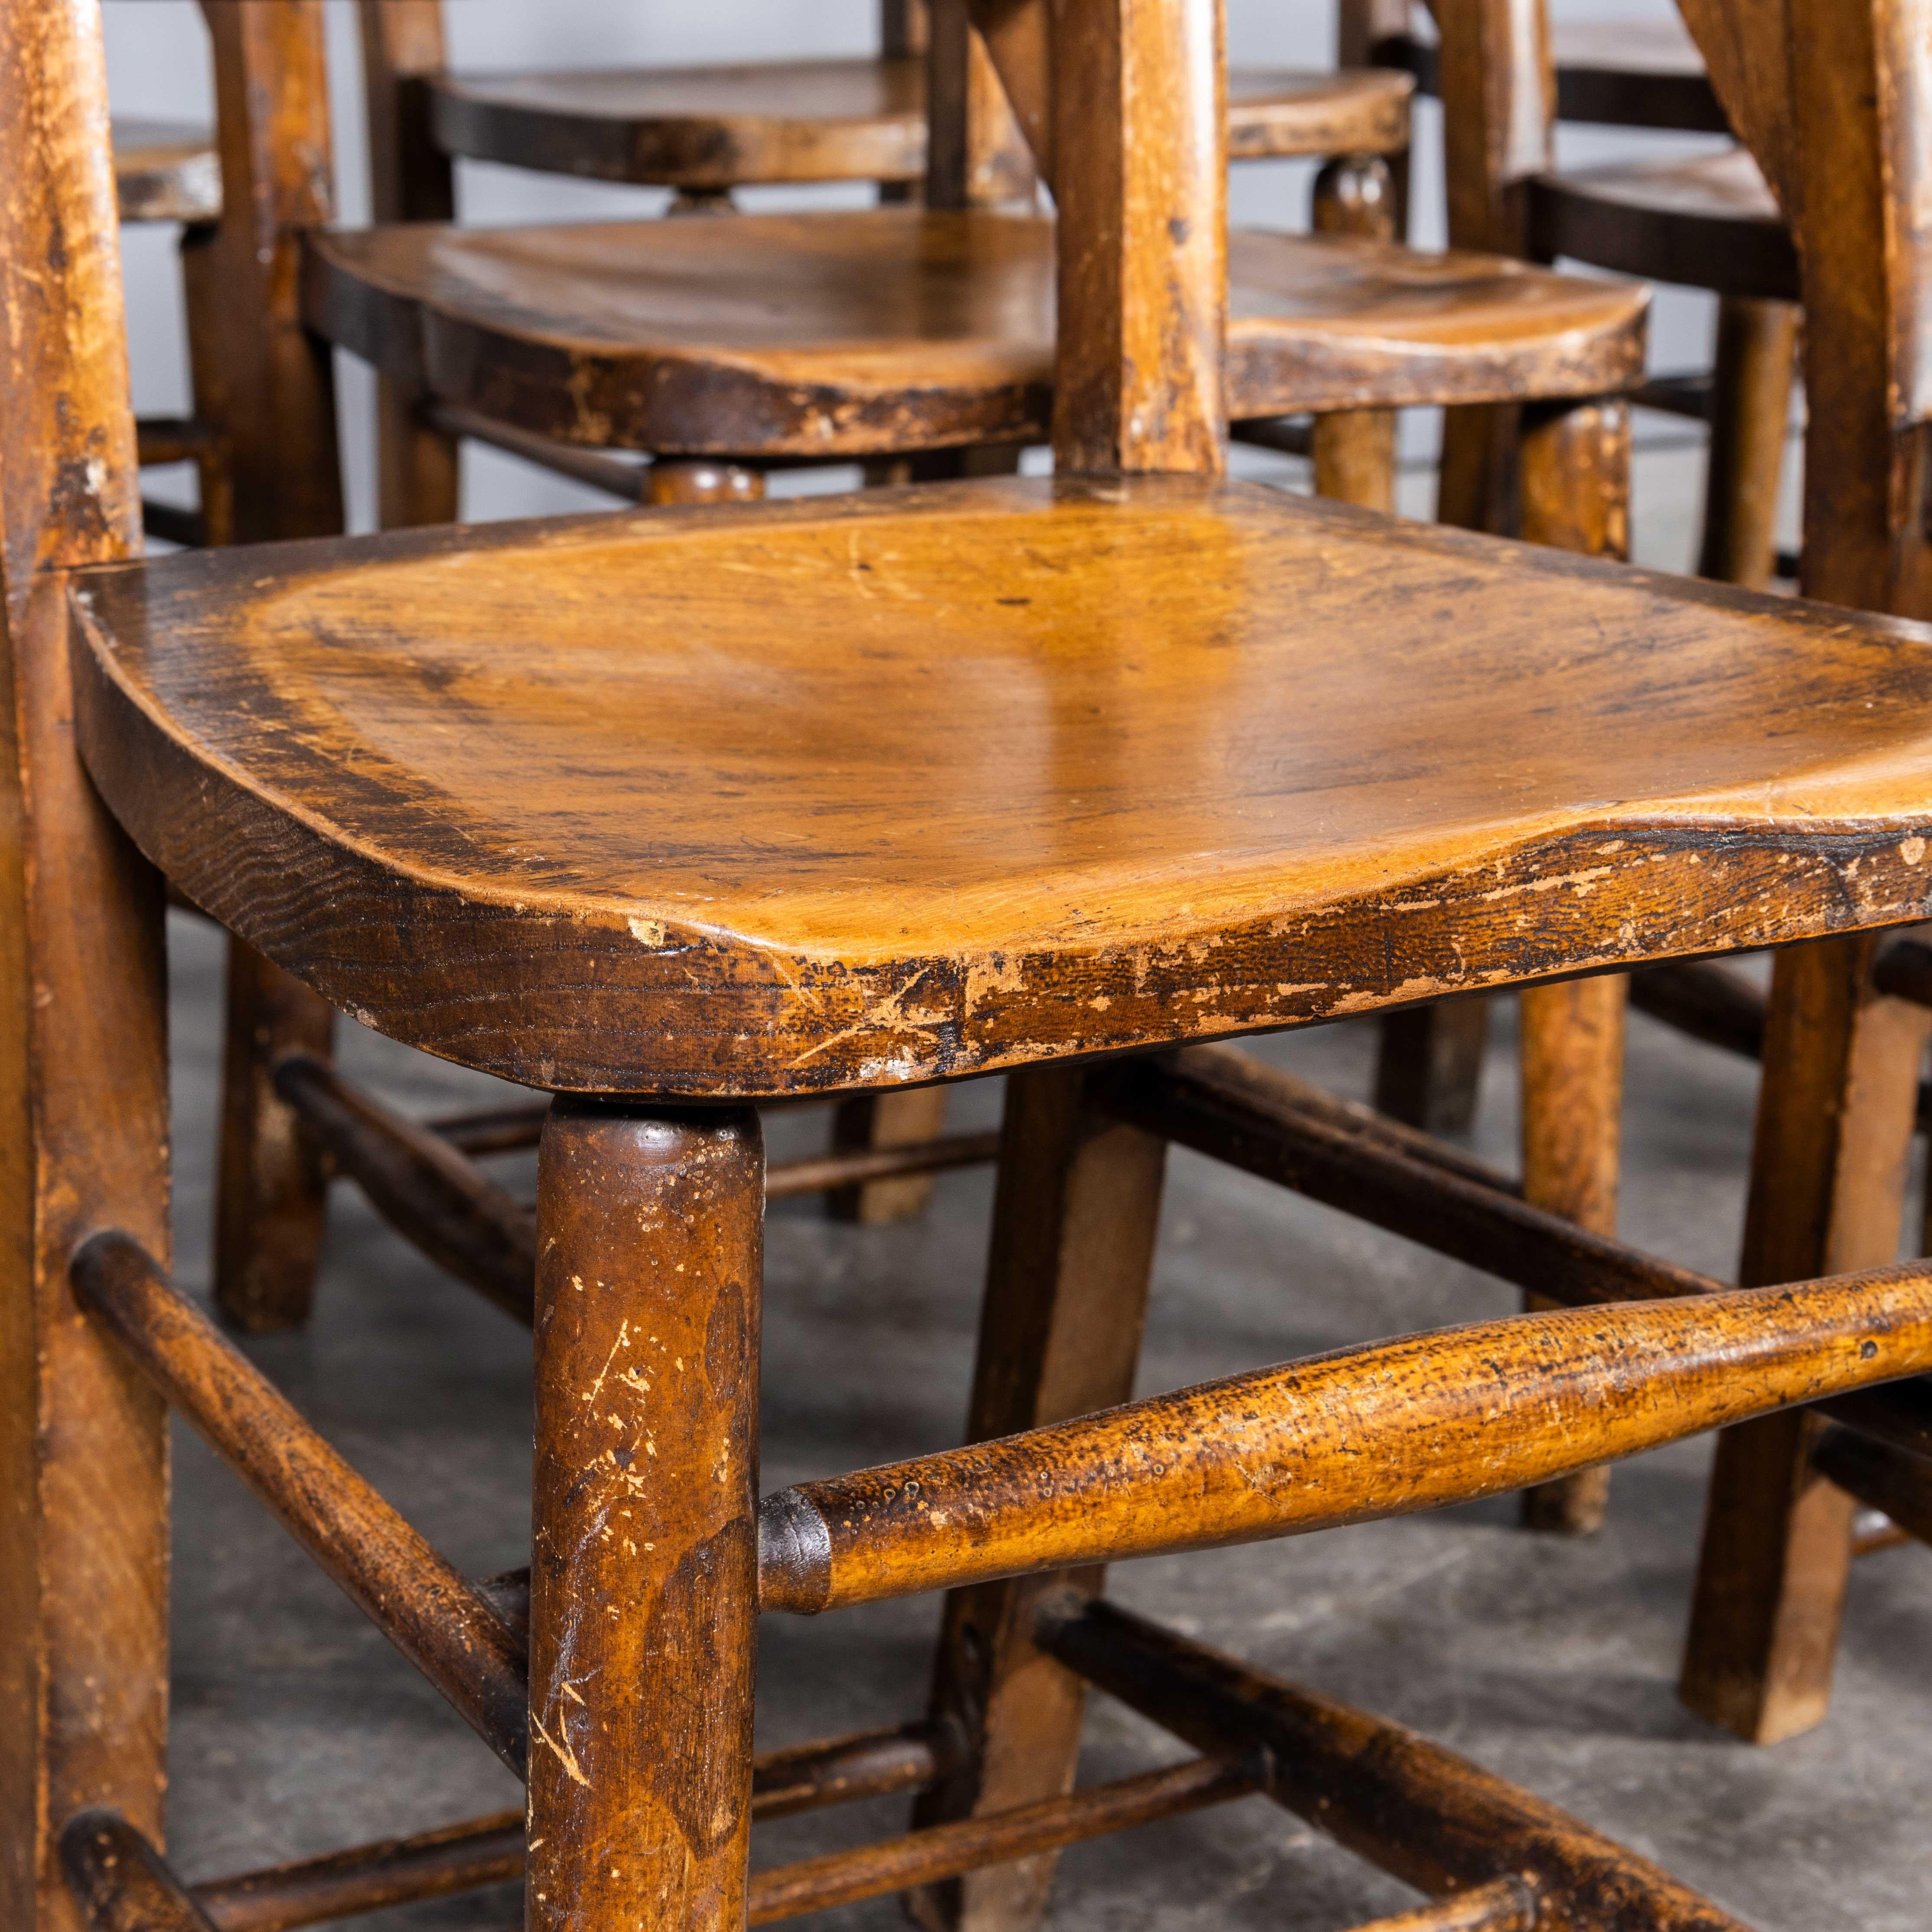 1940’s Solid Ash Church – Chapel Dining Chairs – Good Quantity Available
1940’s Solid Ash Church – Chapel Dining Chairs – Good Quantity Available. England has a wonderfully rich heritage for making chairs. At the height of production at the turn of